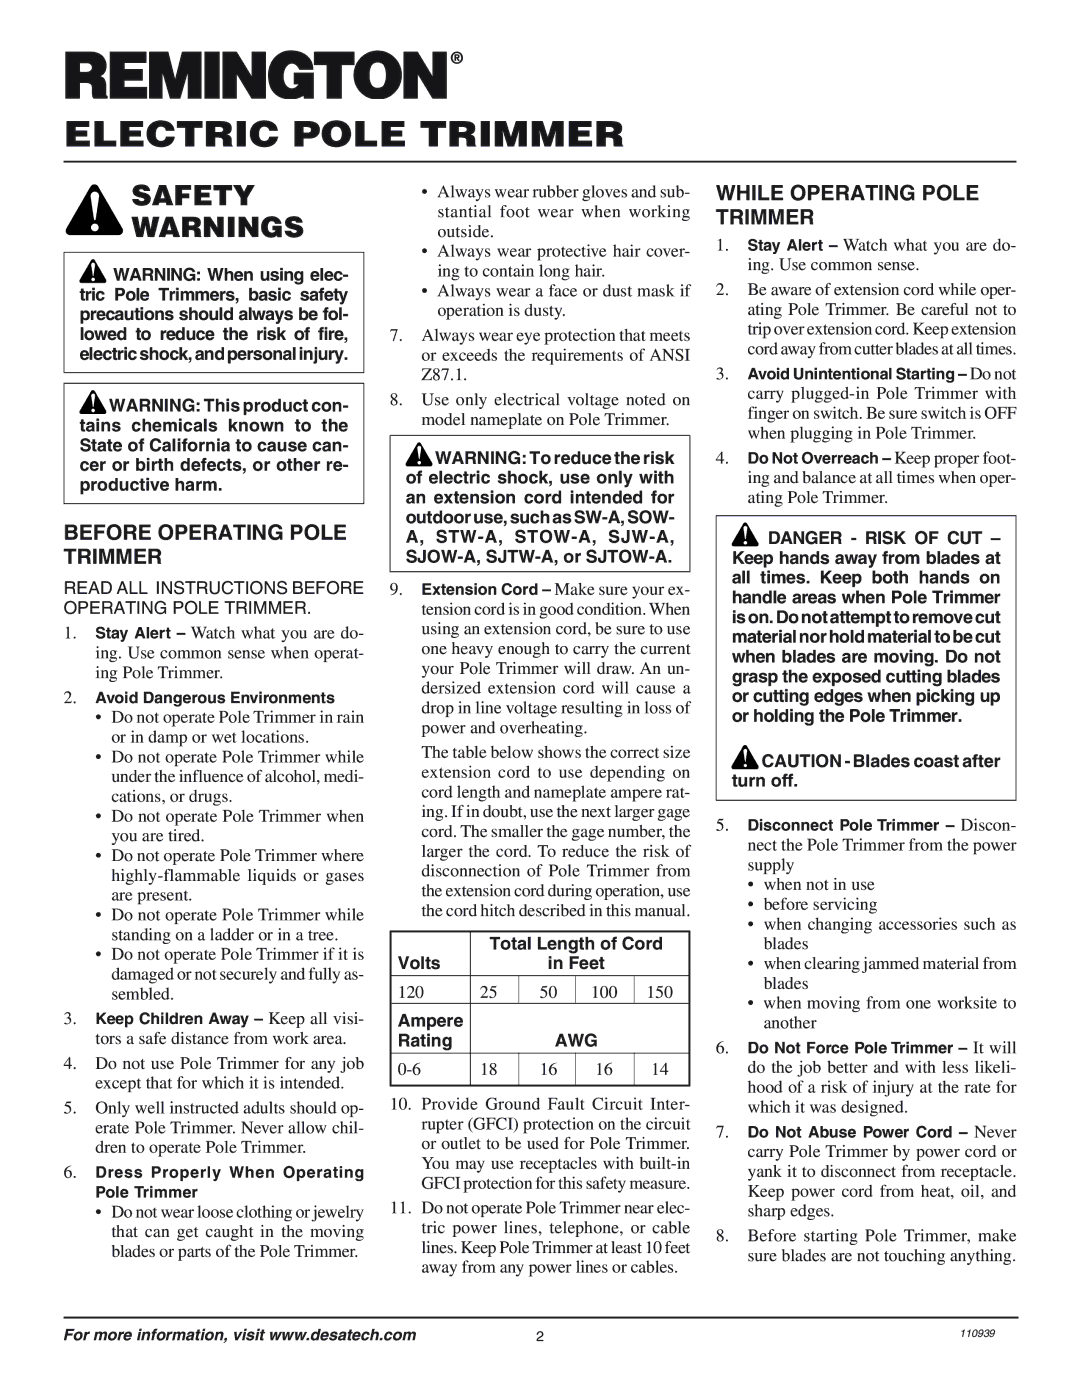 Desa 110946-01 owner manual Safety, Before Operating Pole Trimmer, While Operating Pole Trimmer 